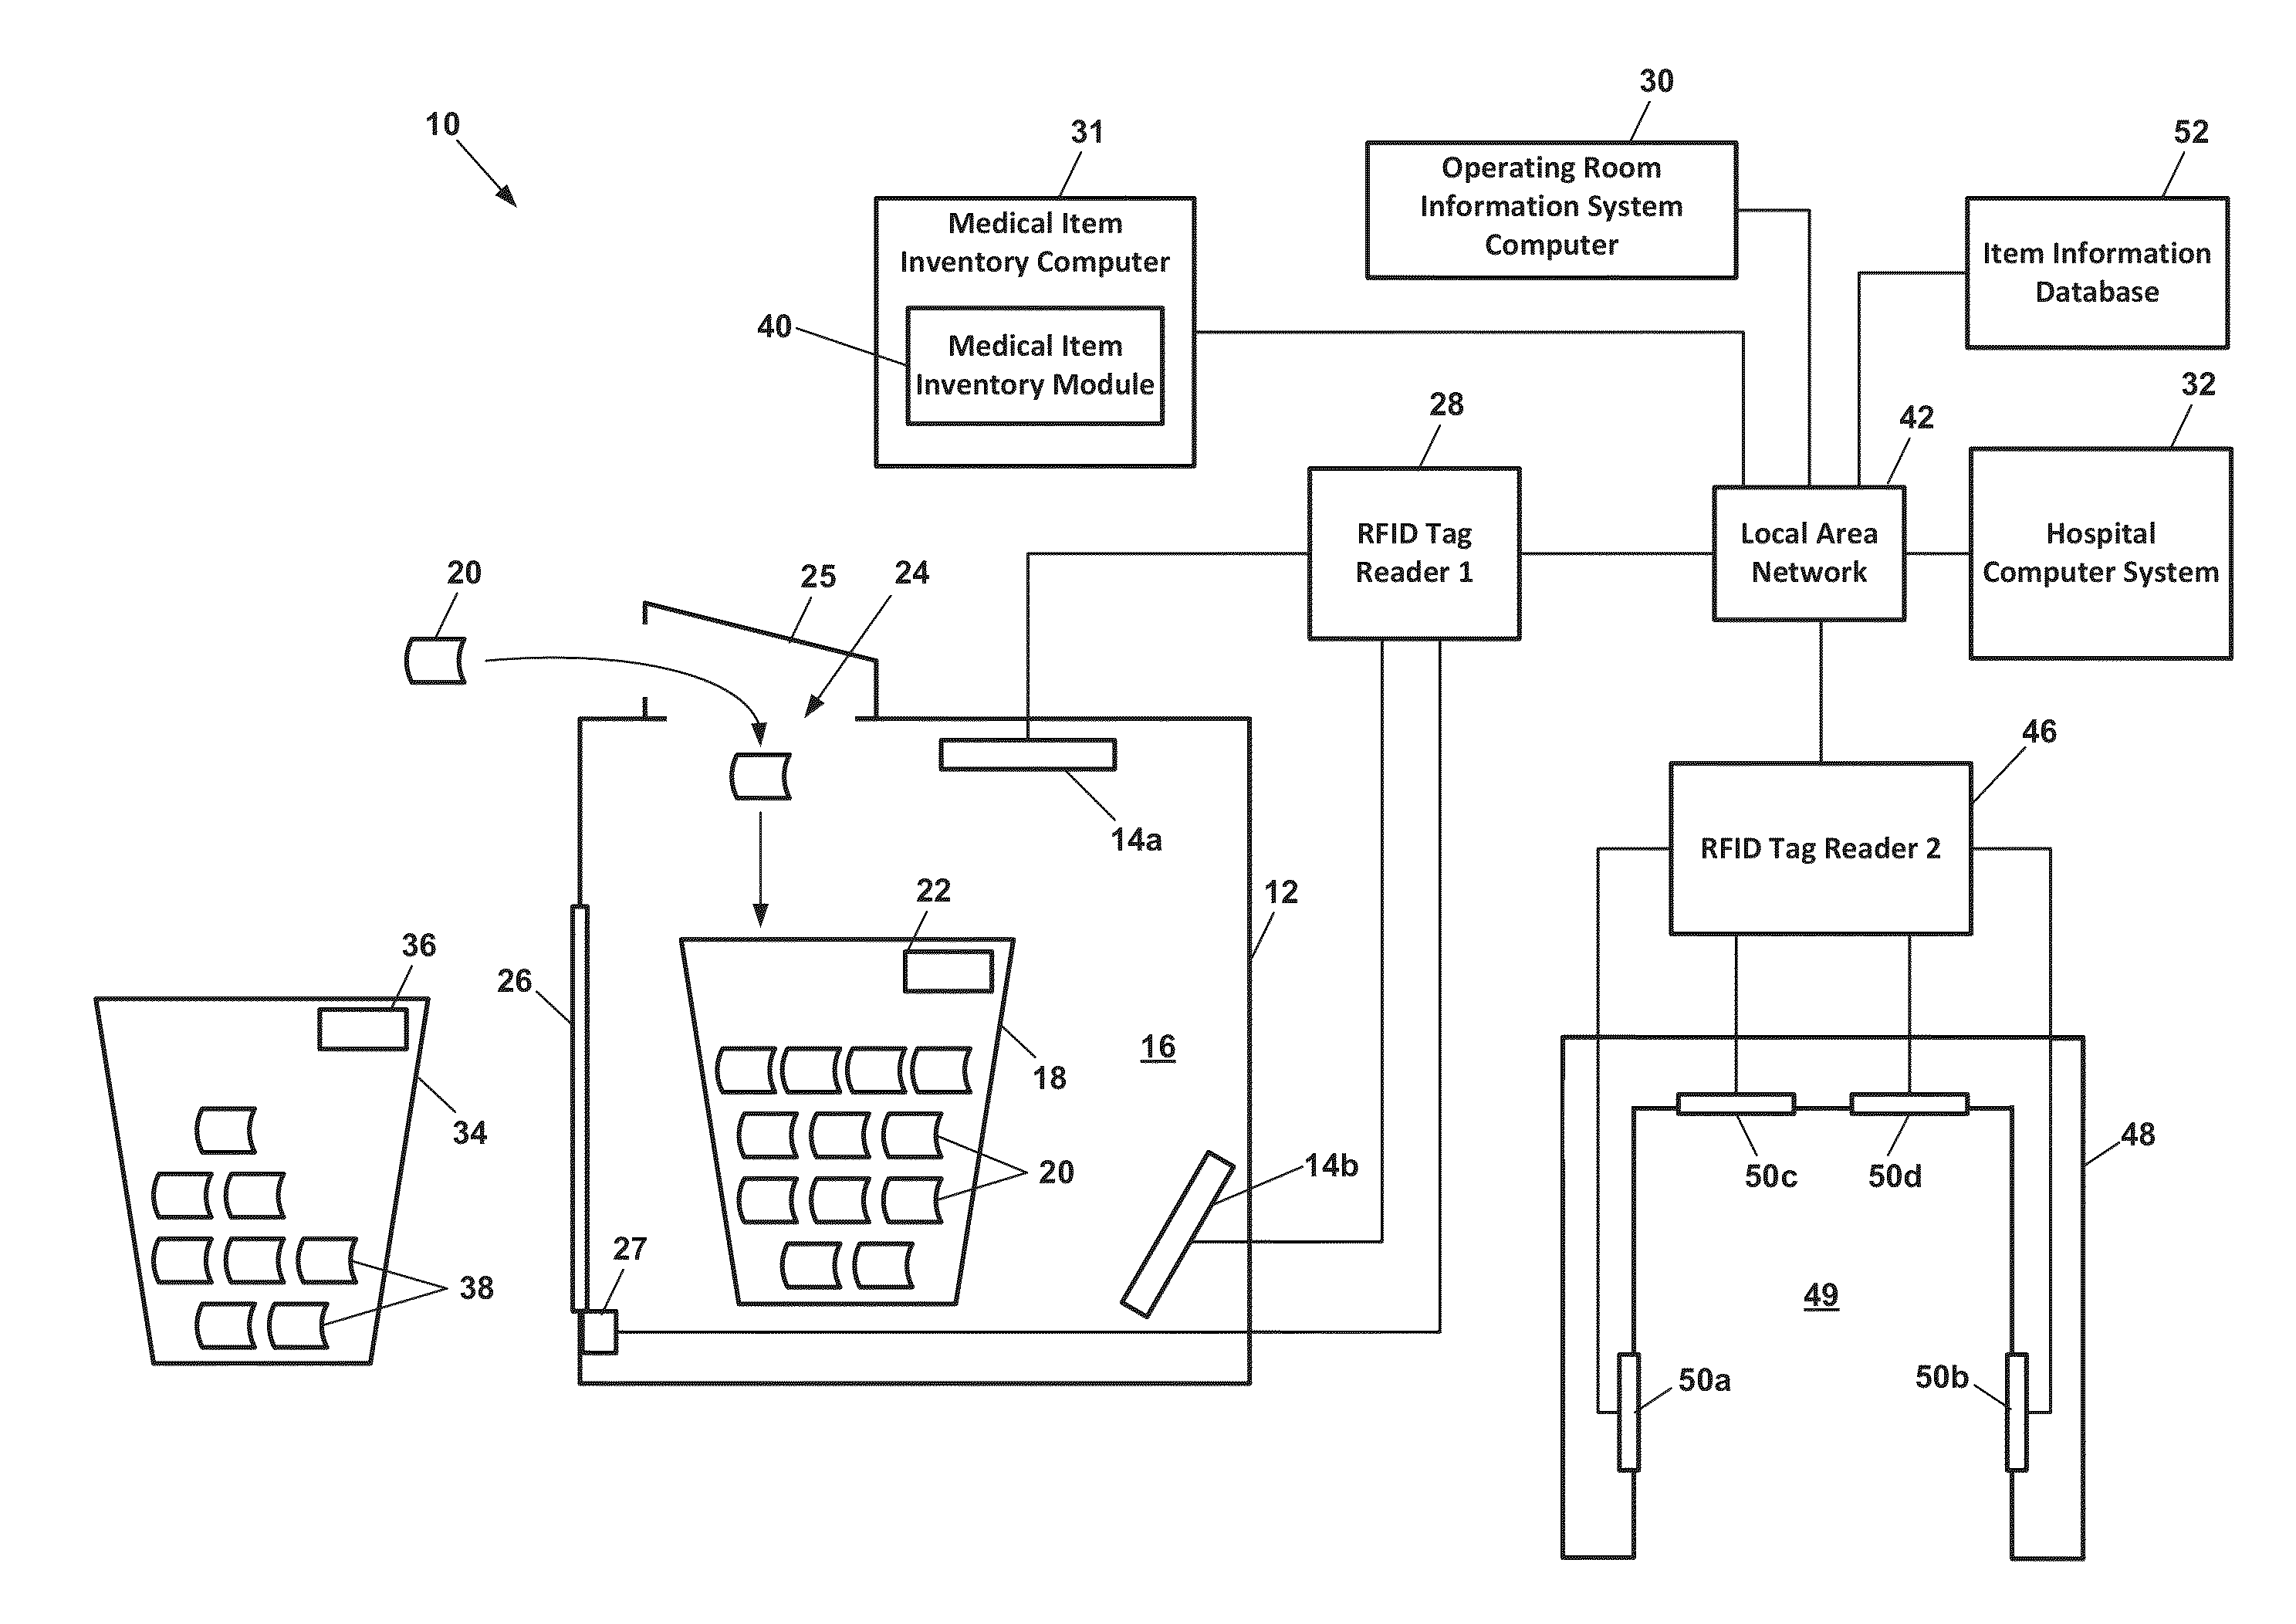 System for Sensing and Recording Consumption of Medical Items During Medical Procedure